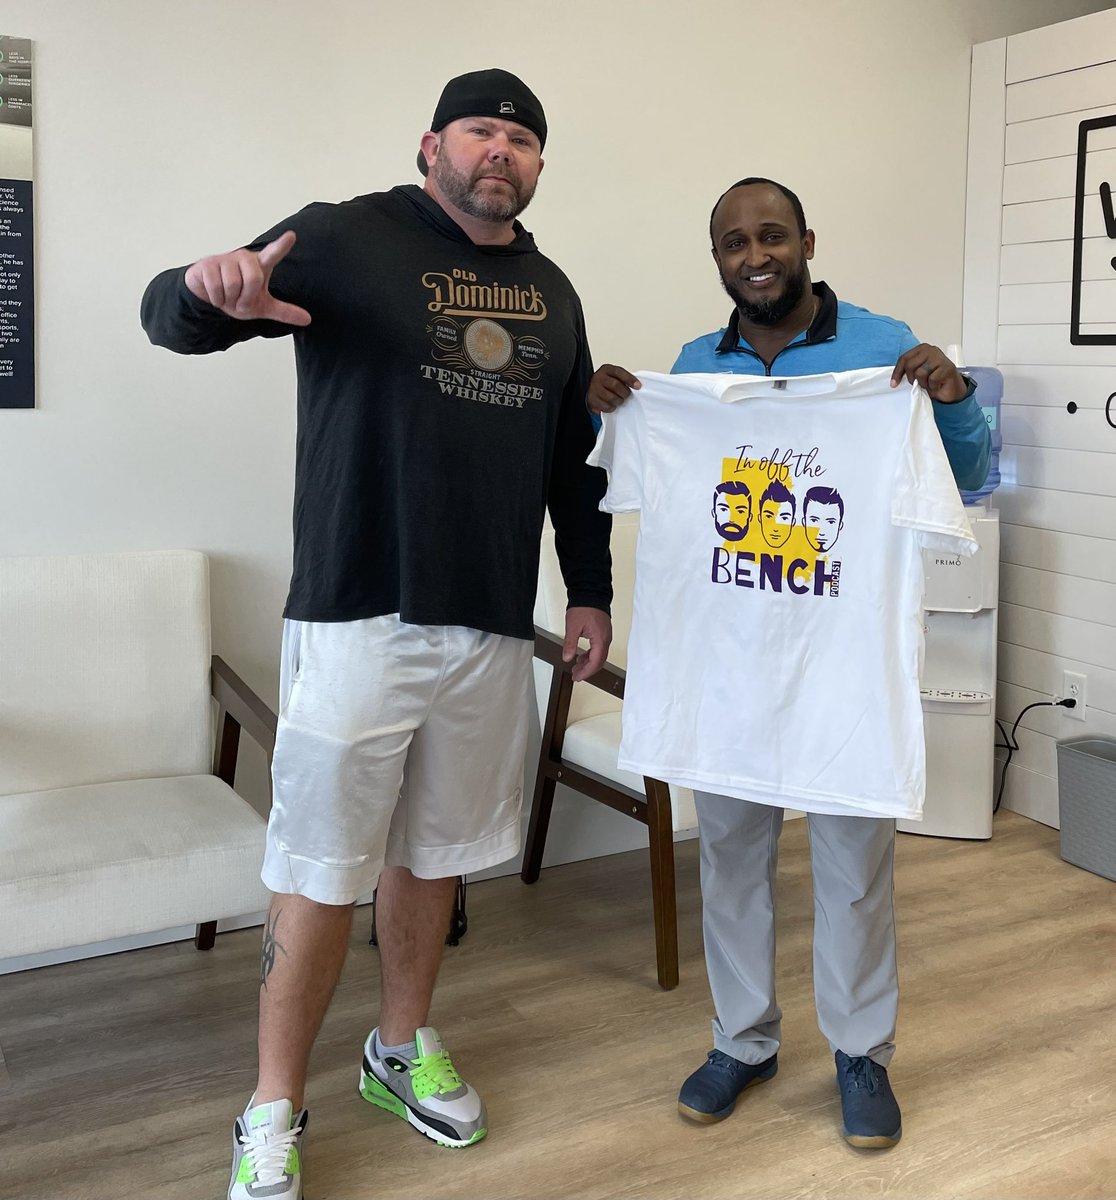 Went and seen DR Victor Robinson and got that back and neck cracked and gave him one of the new shirts that came in 💜💛 #chiropractor #choose901 coming to the Hernando soon 🔥🔥🔥 #ThePowerhouse